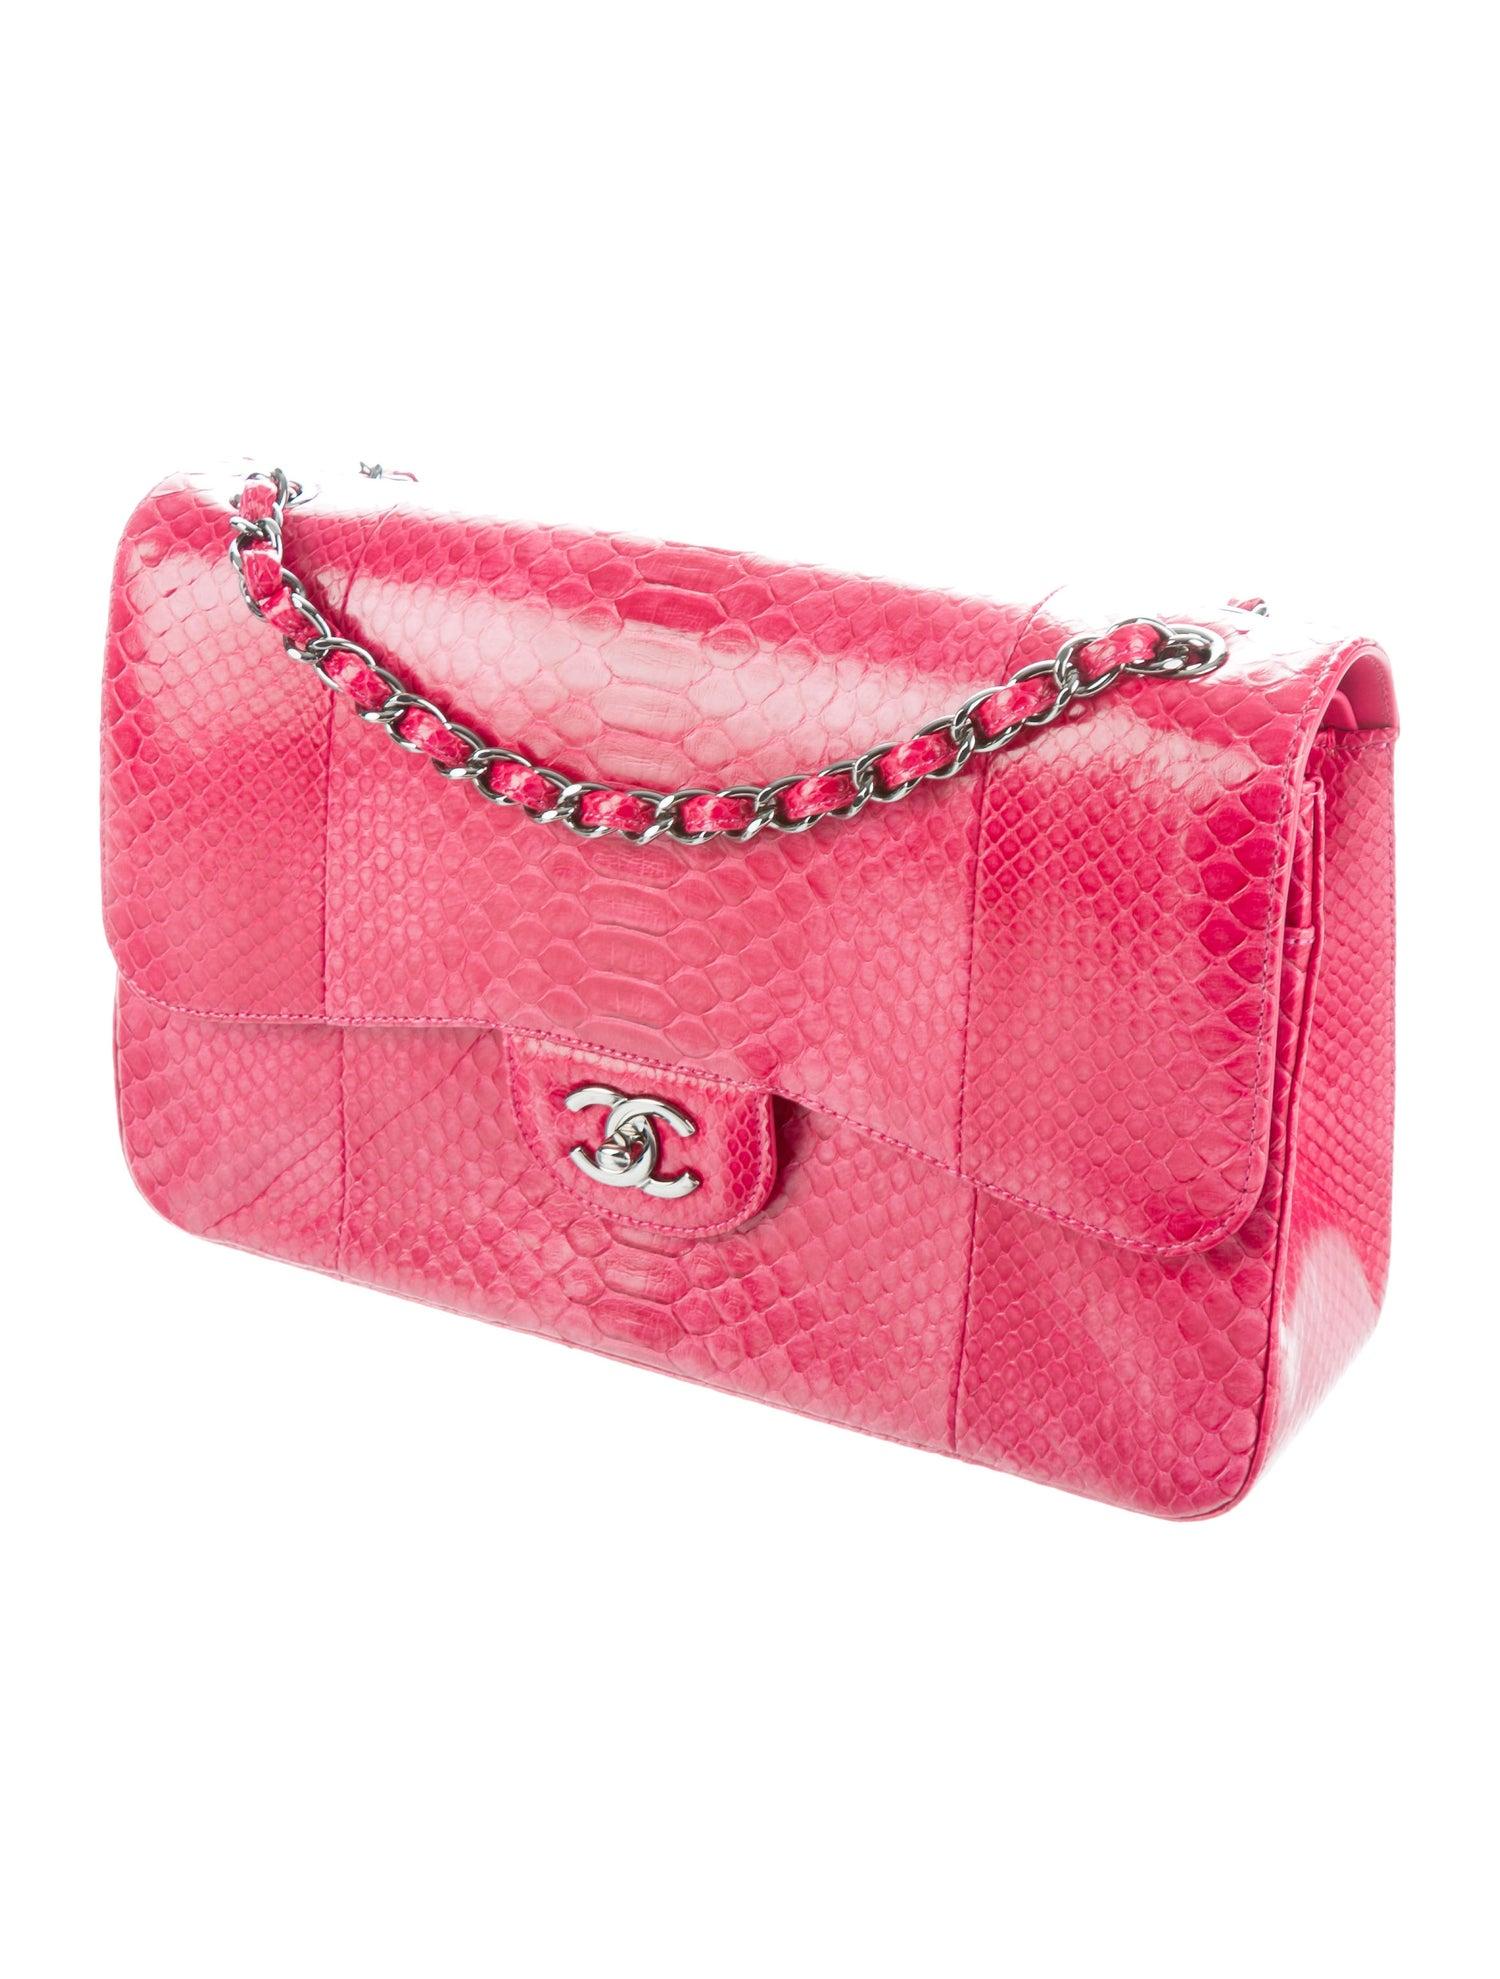 The Exotic Chanel You Need to Complement Your Collection.   

Since announcing the discontinuation of exotic skin handbags, the demand for exotic Chanel has increased tenfold. And the demand for snakeskin Chanel is no exception. Crafted of exotic